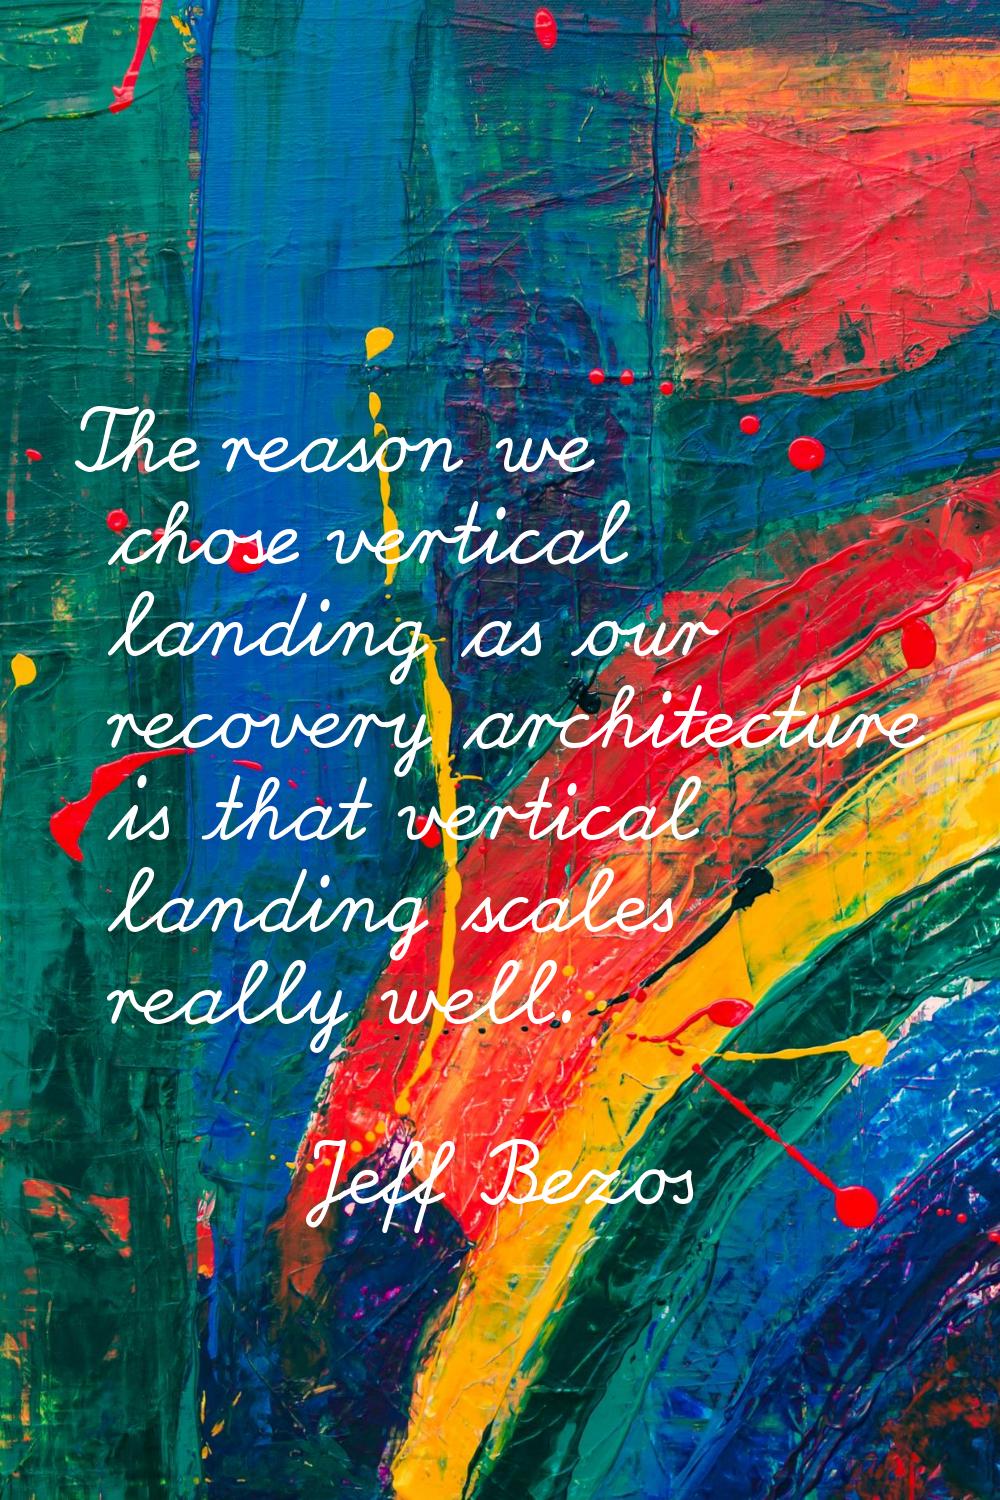 The reason we chose vertical landing as our recovery architecture is that vertical landing scales r